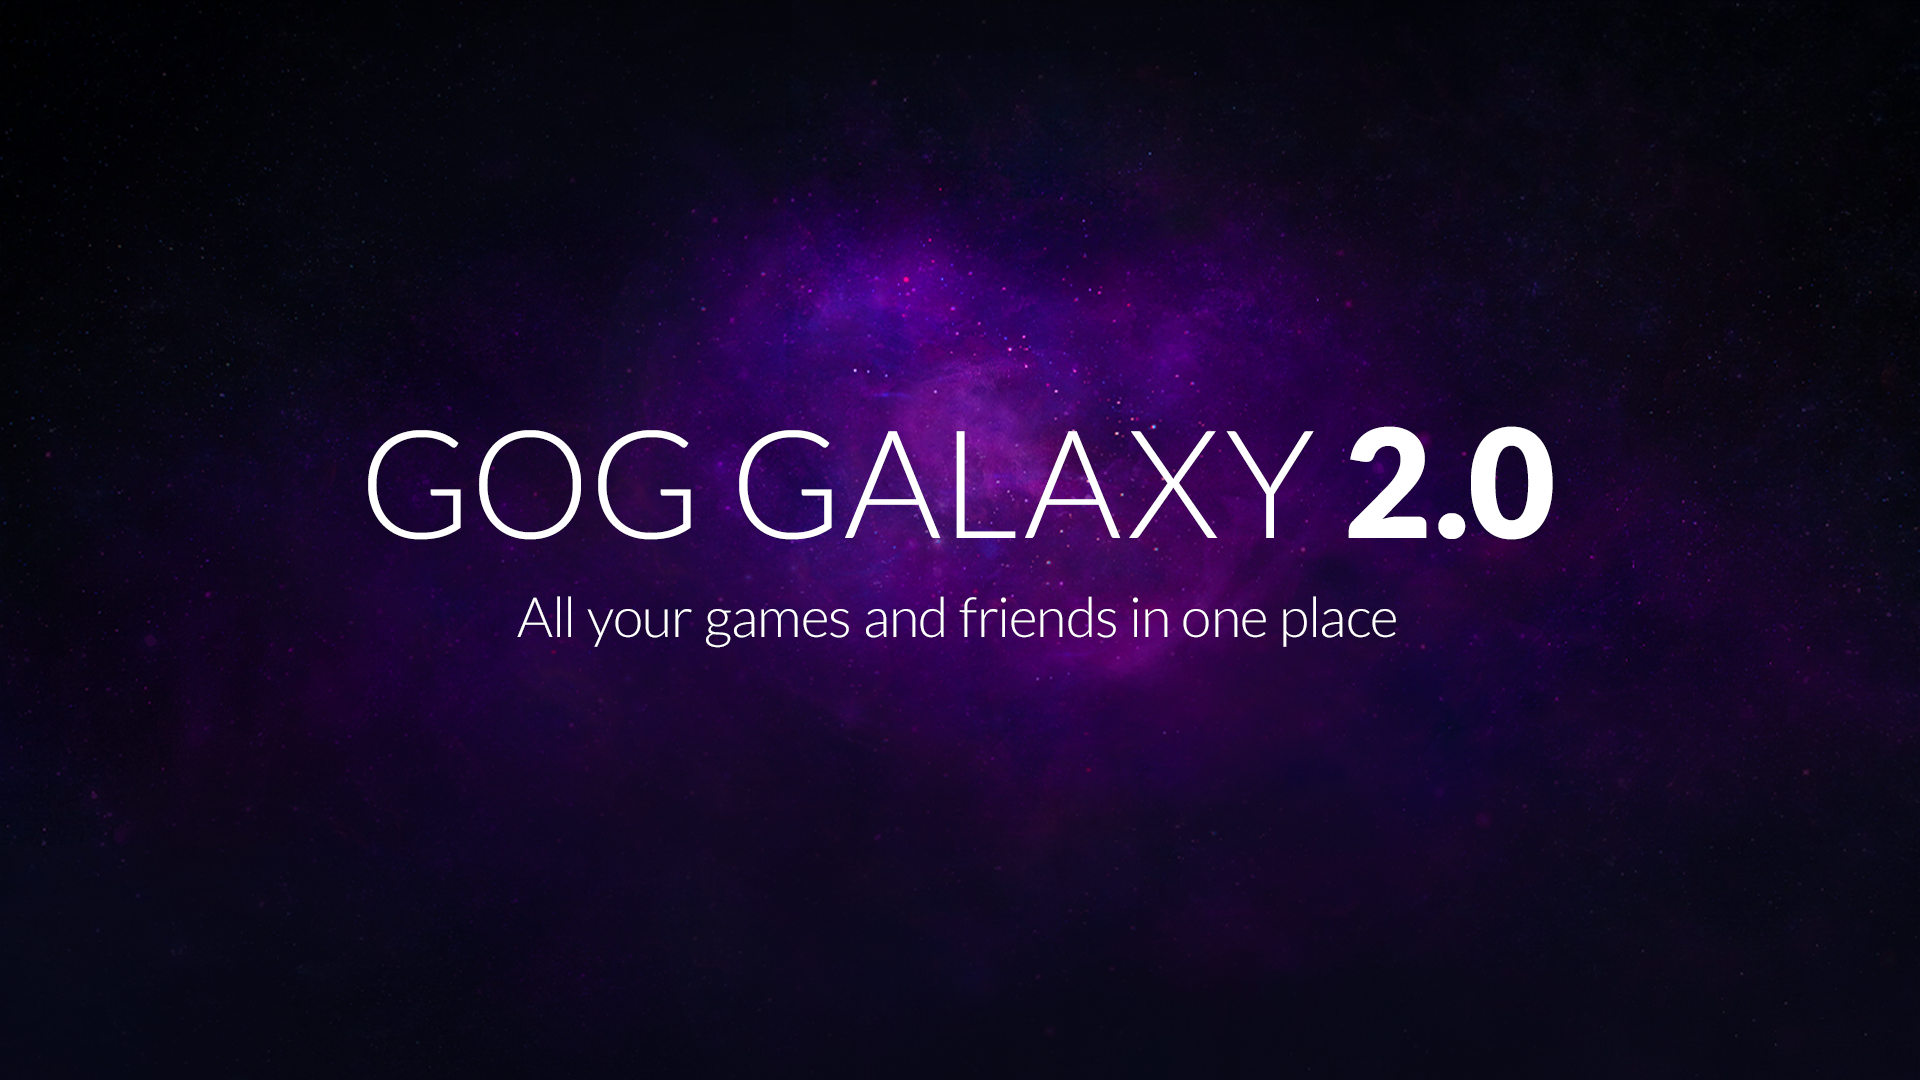 unlock Dare træfning GOG GALAXY 2.0. All your games and friends in one place - CD PROJEKT